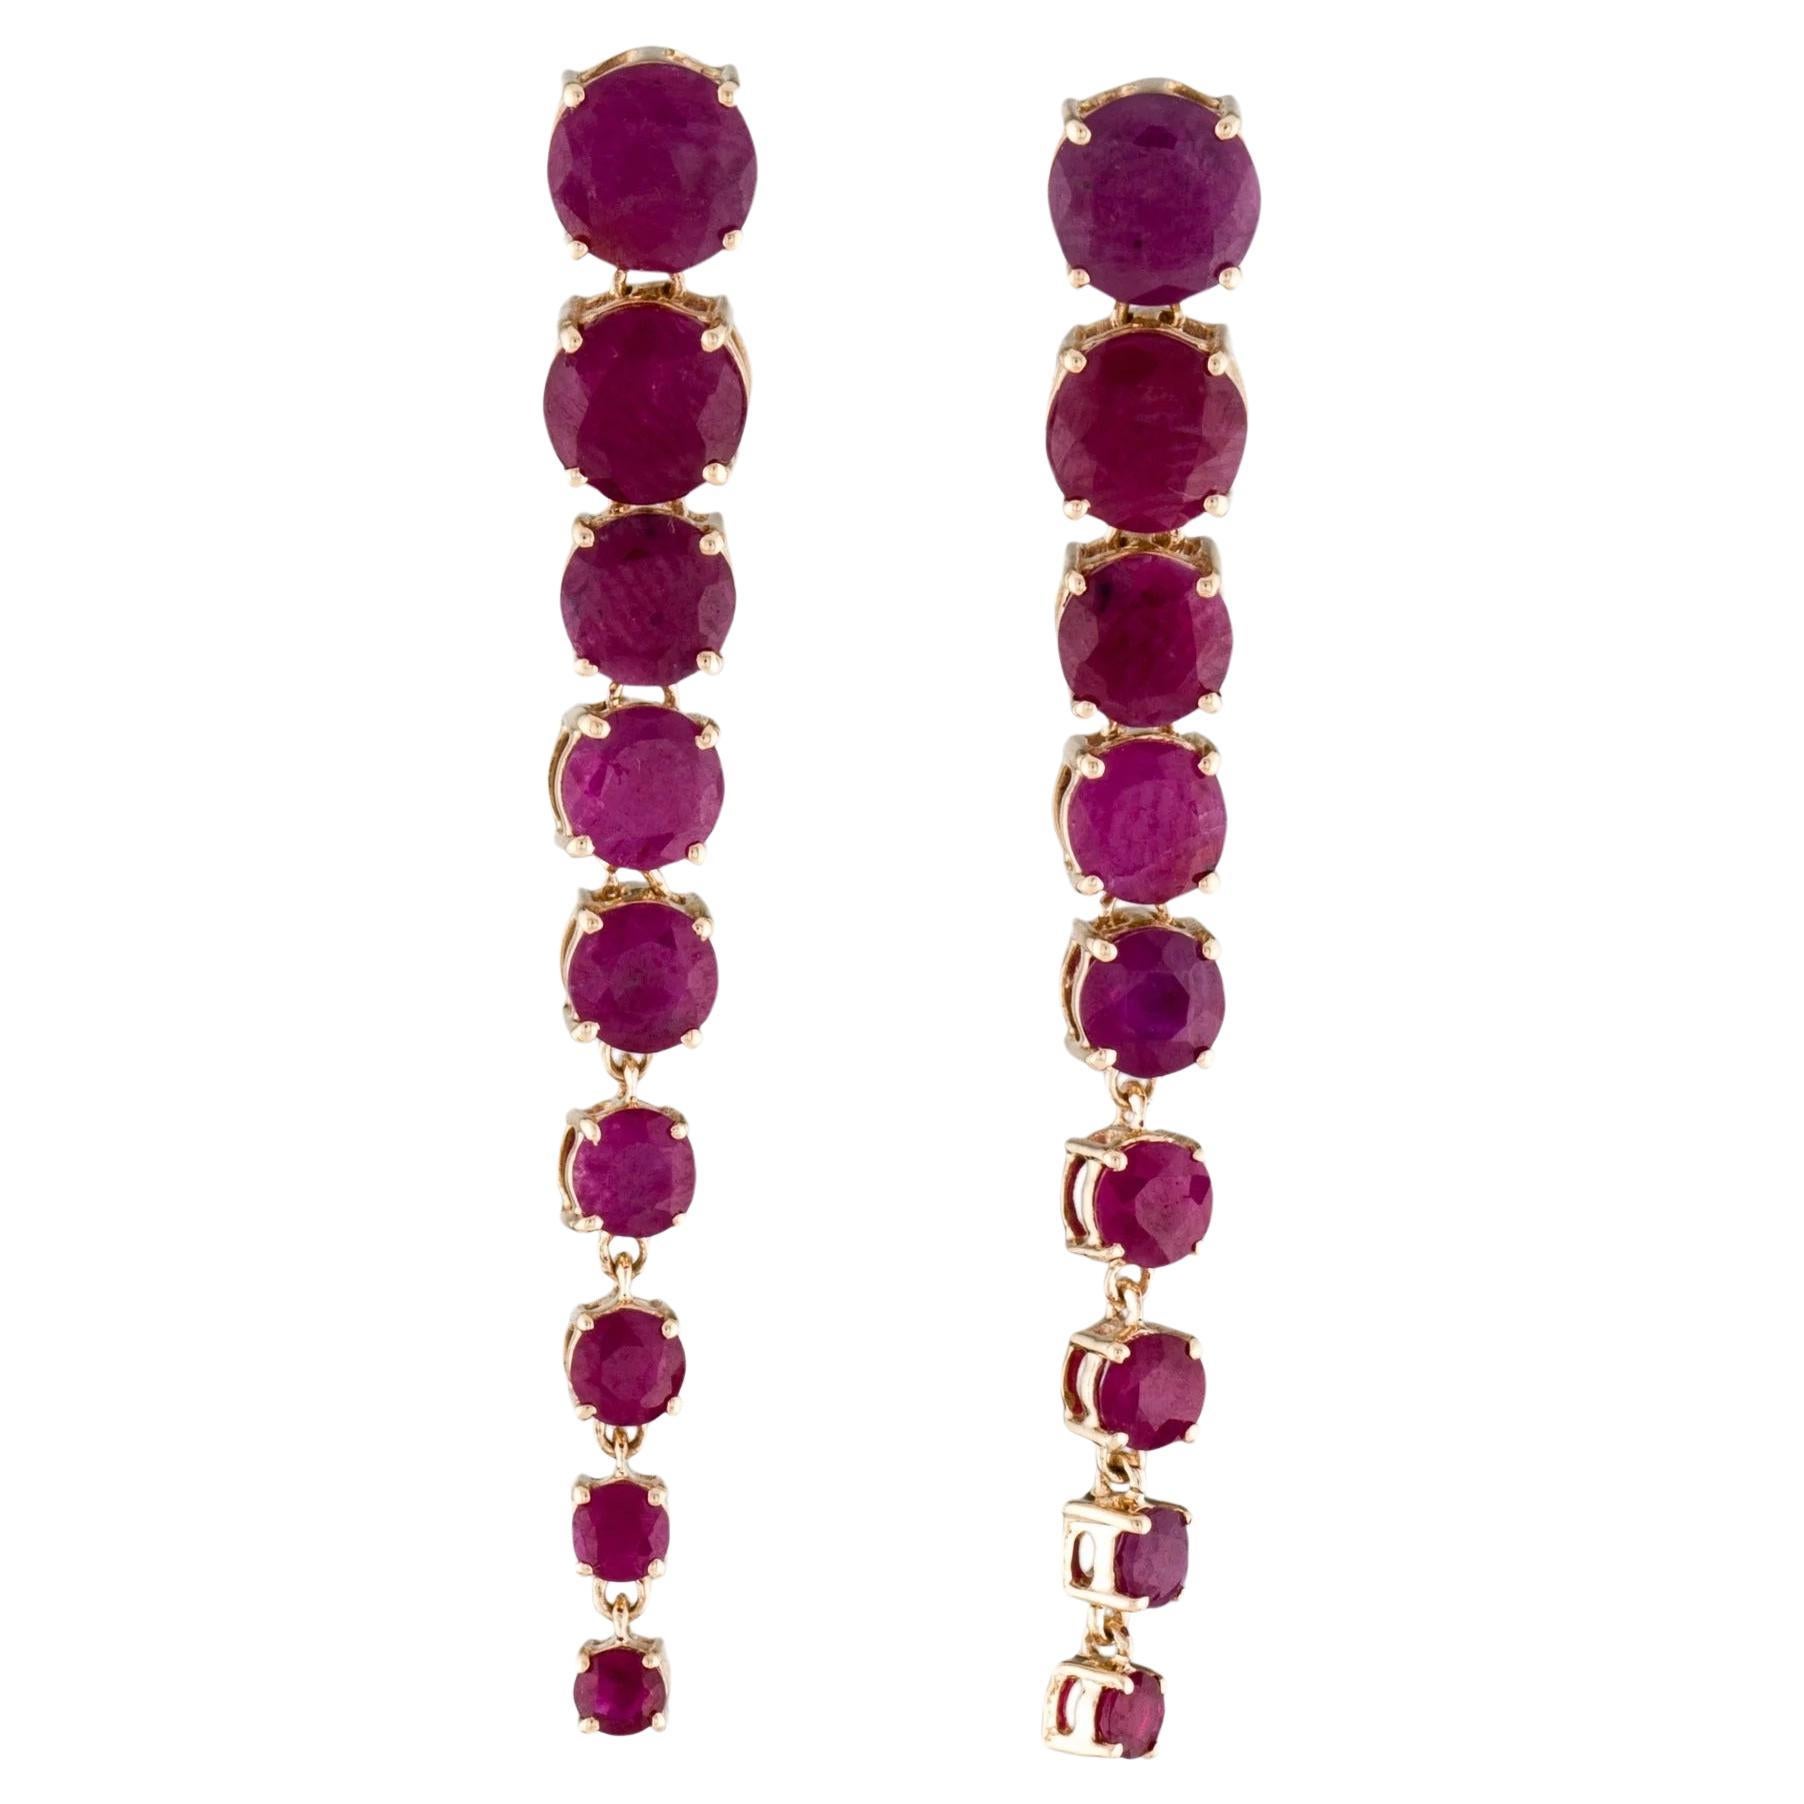 Stylish 14K Yellow Gold Earrings with 6.45 Carat Round Modified Brilliant Ruby